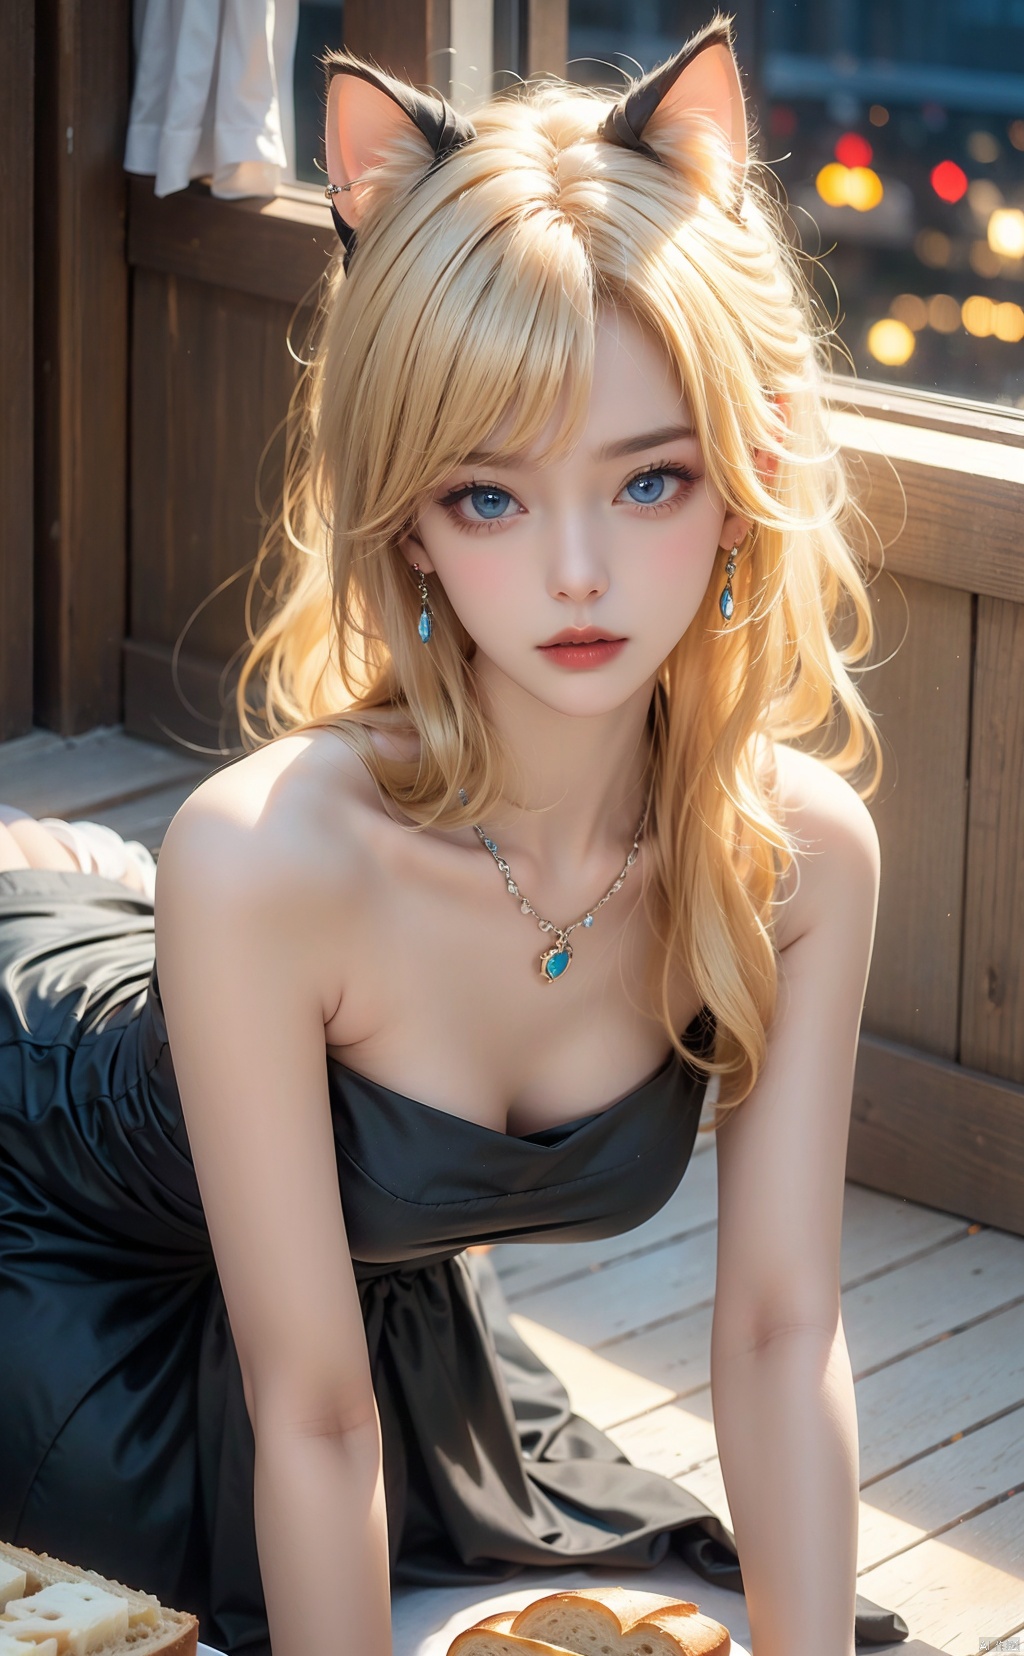  1Girl, blue eyes, Cat's ears (Steamed cat-ear shaped bread),Crawling on all fours, earrings, necklace, jewels, cat whiskers, black gray dress, lights, night, blonde hair